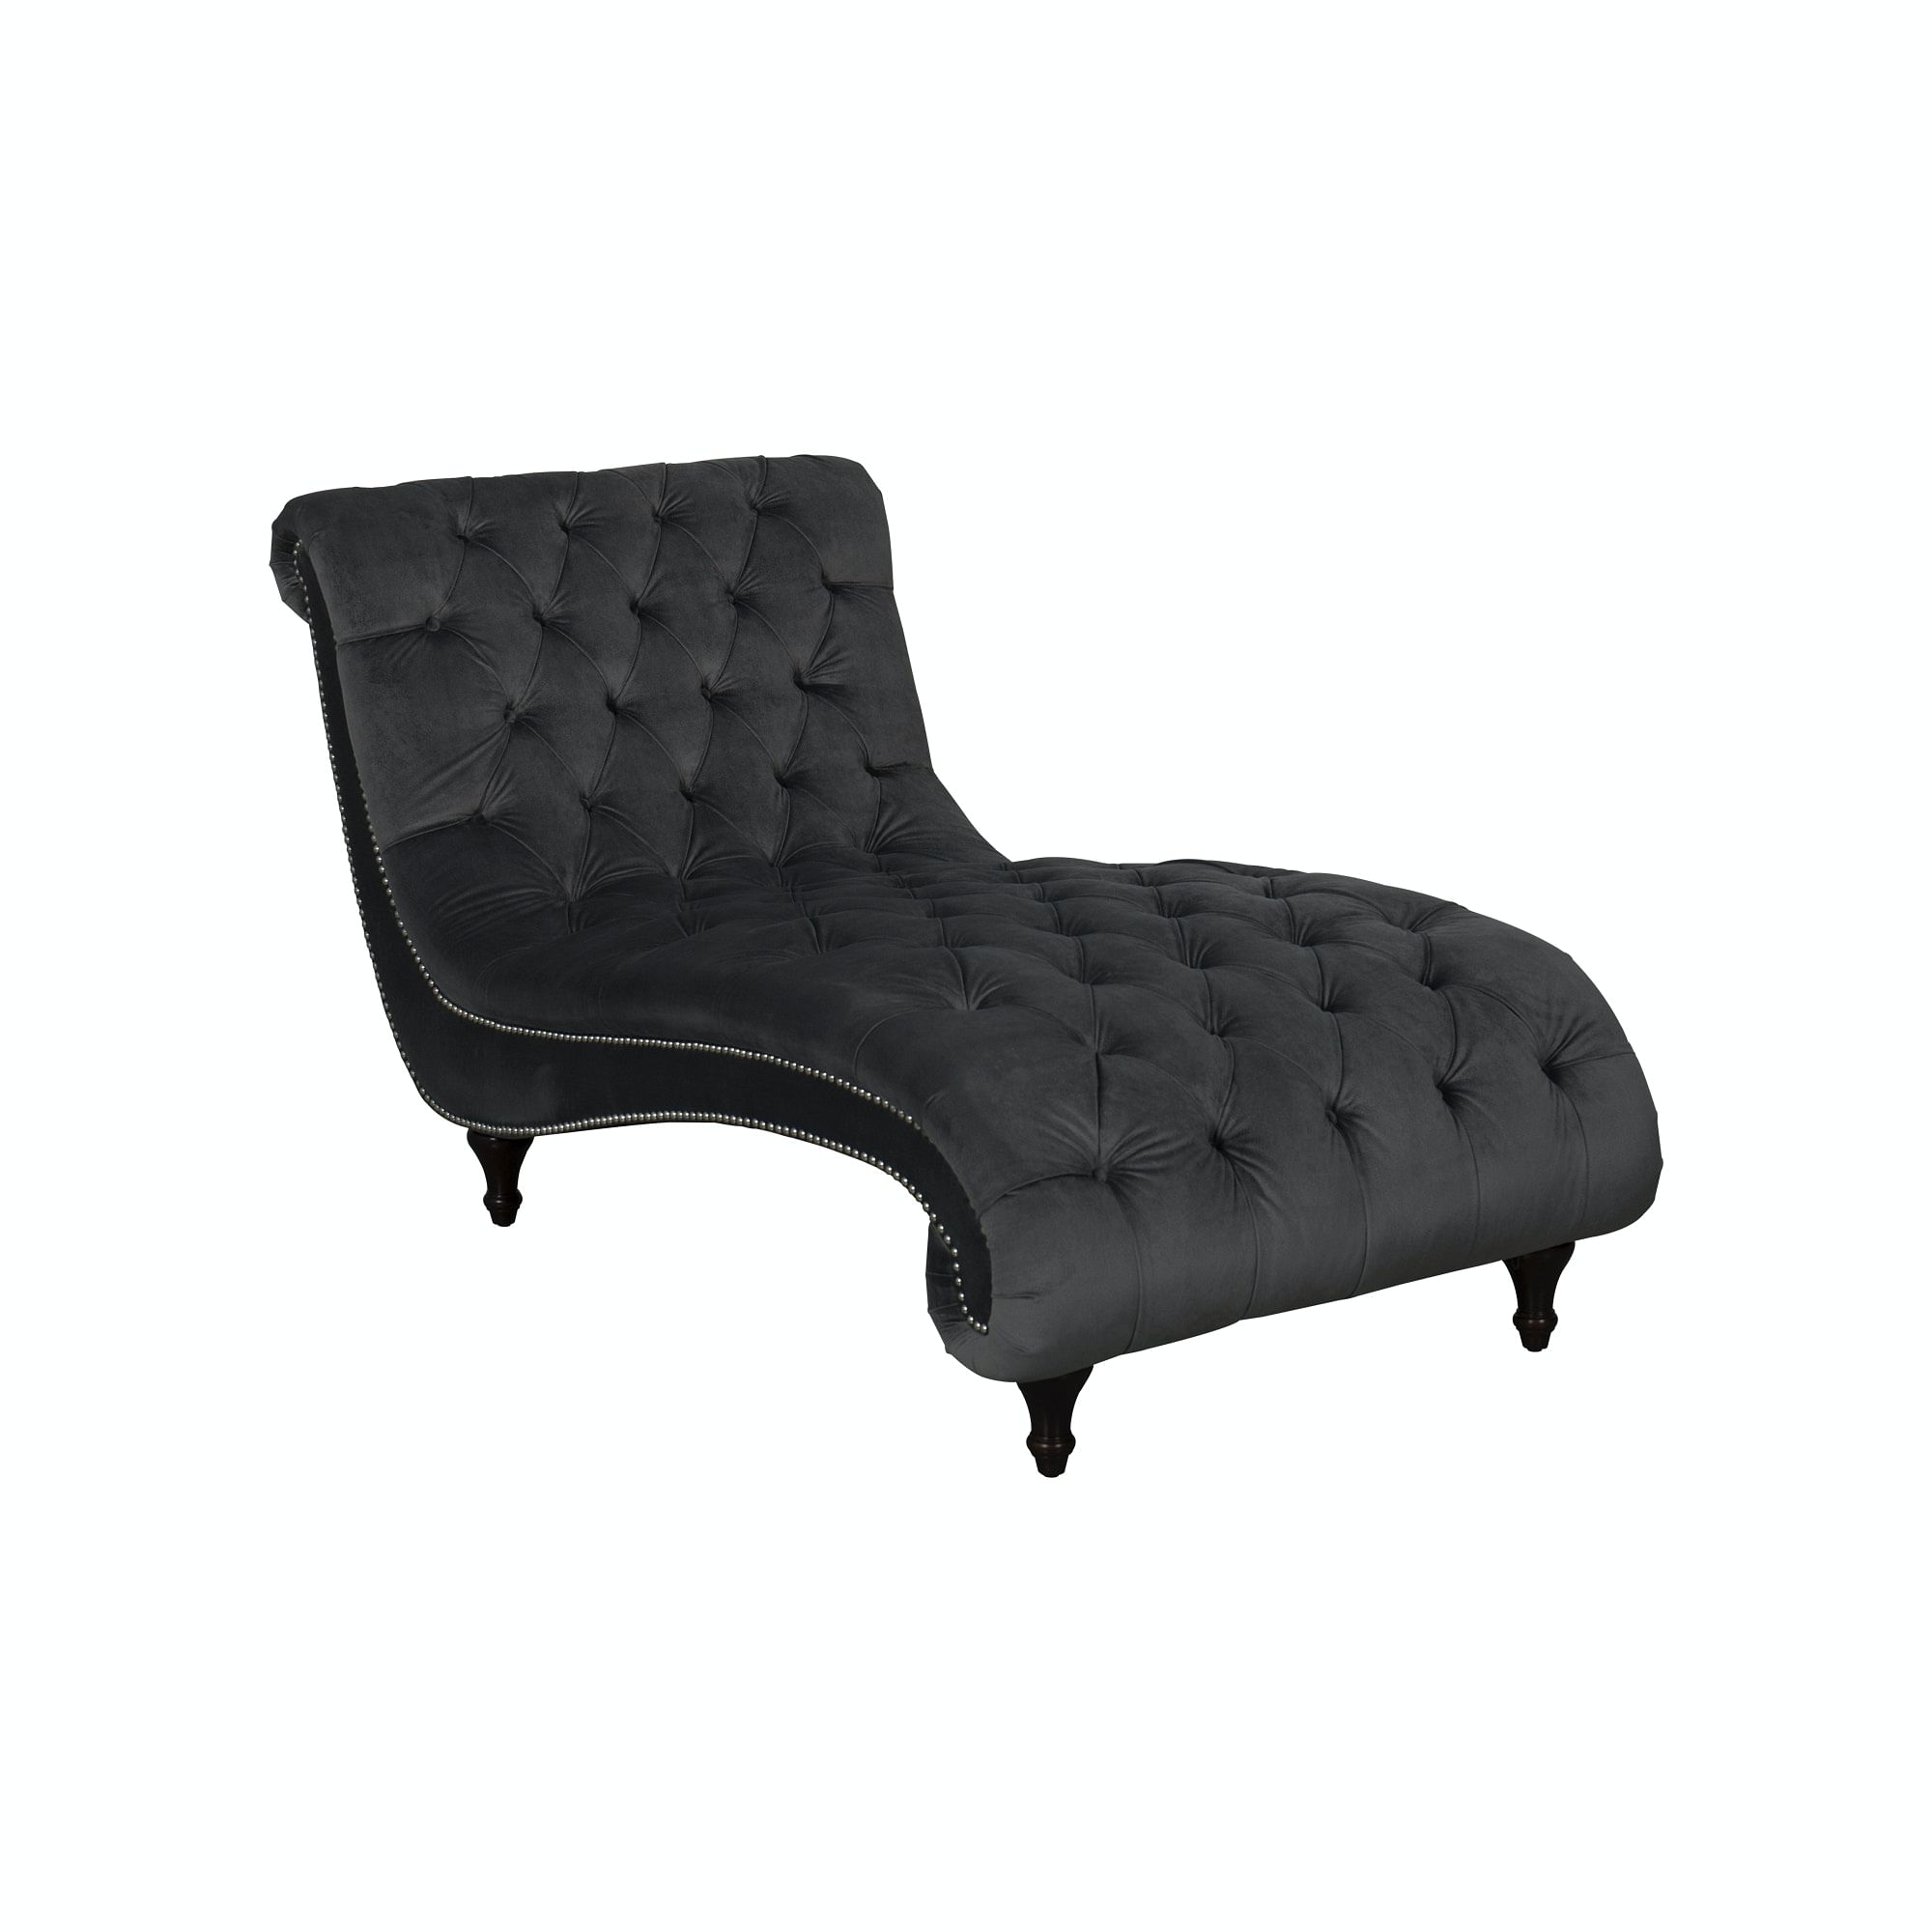 Coaster Living Room Chaise 904106